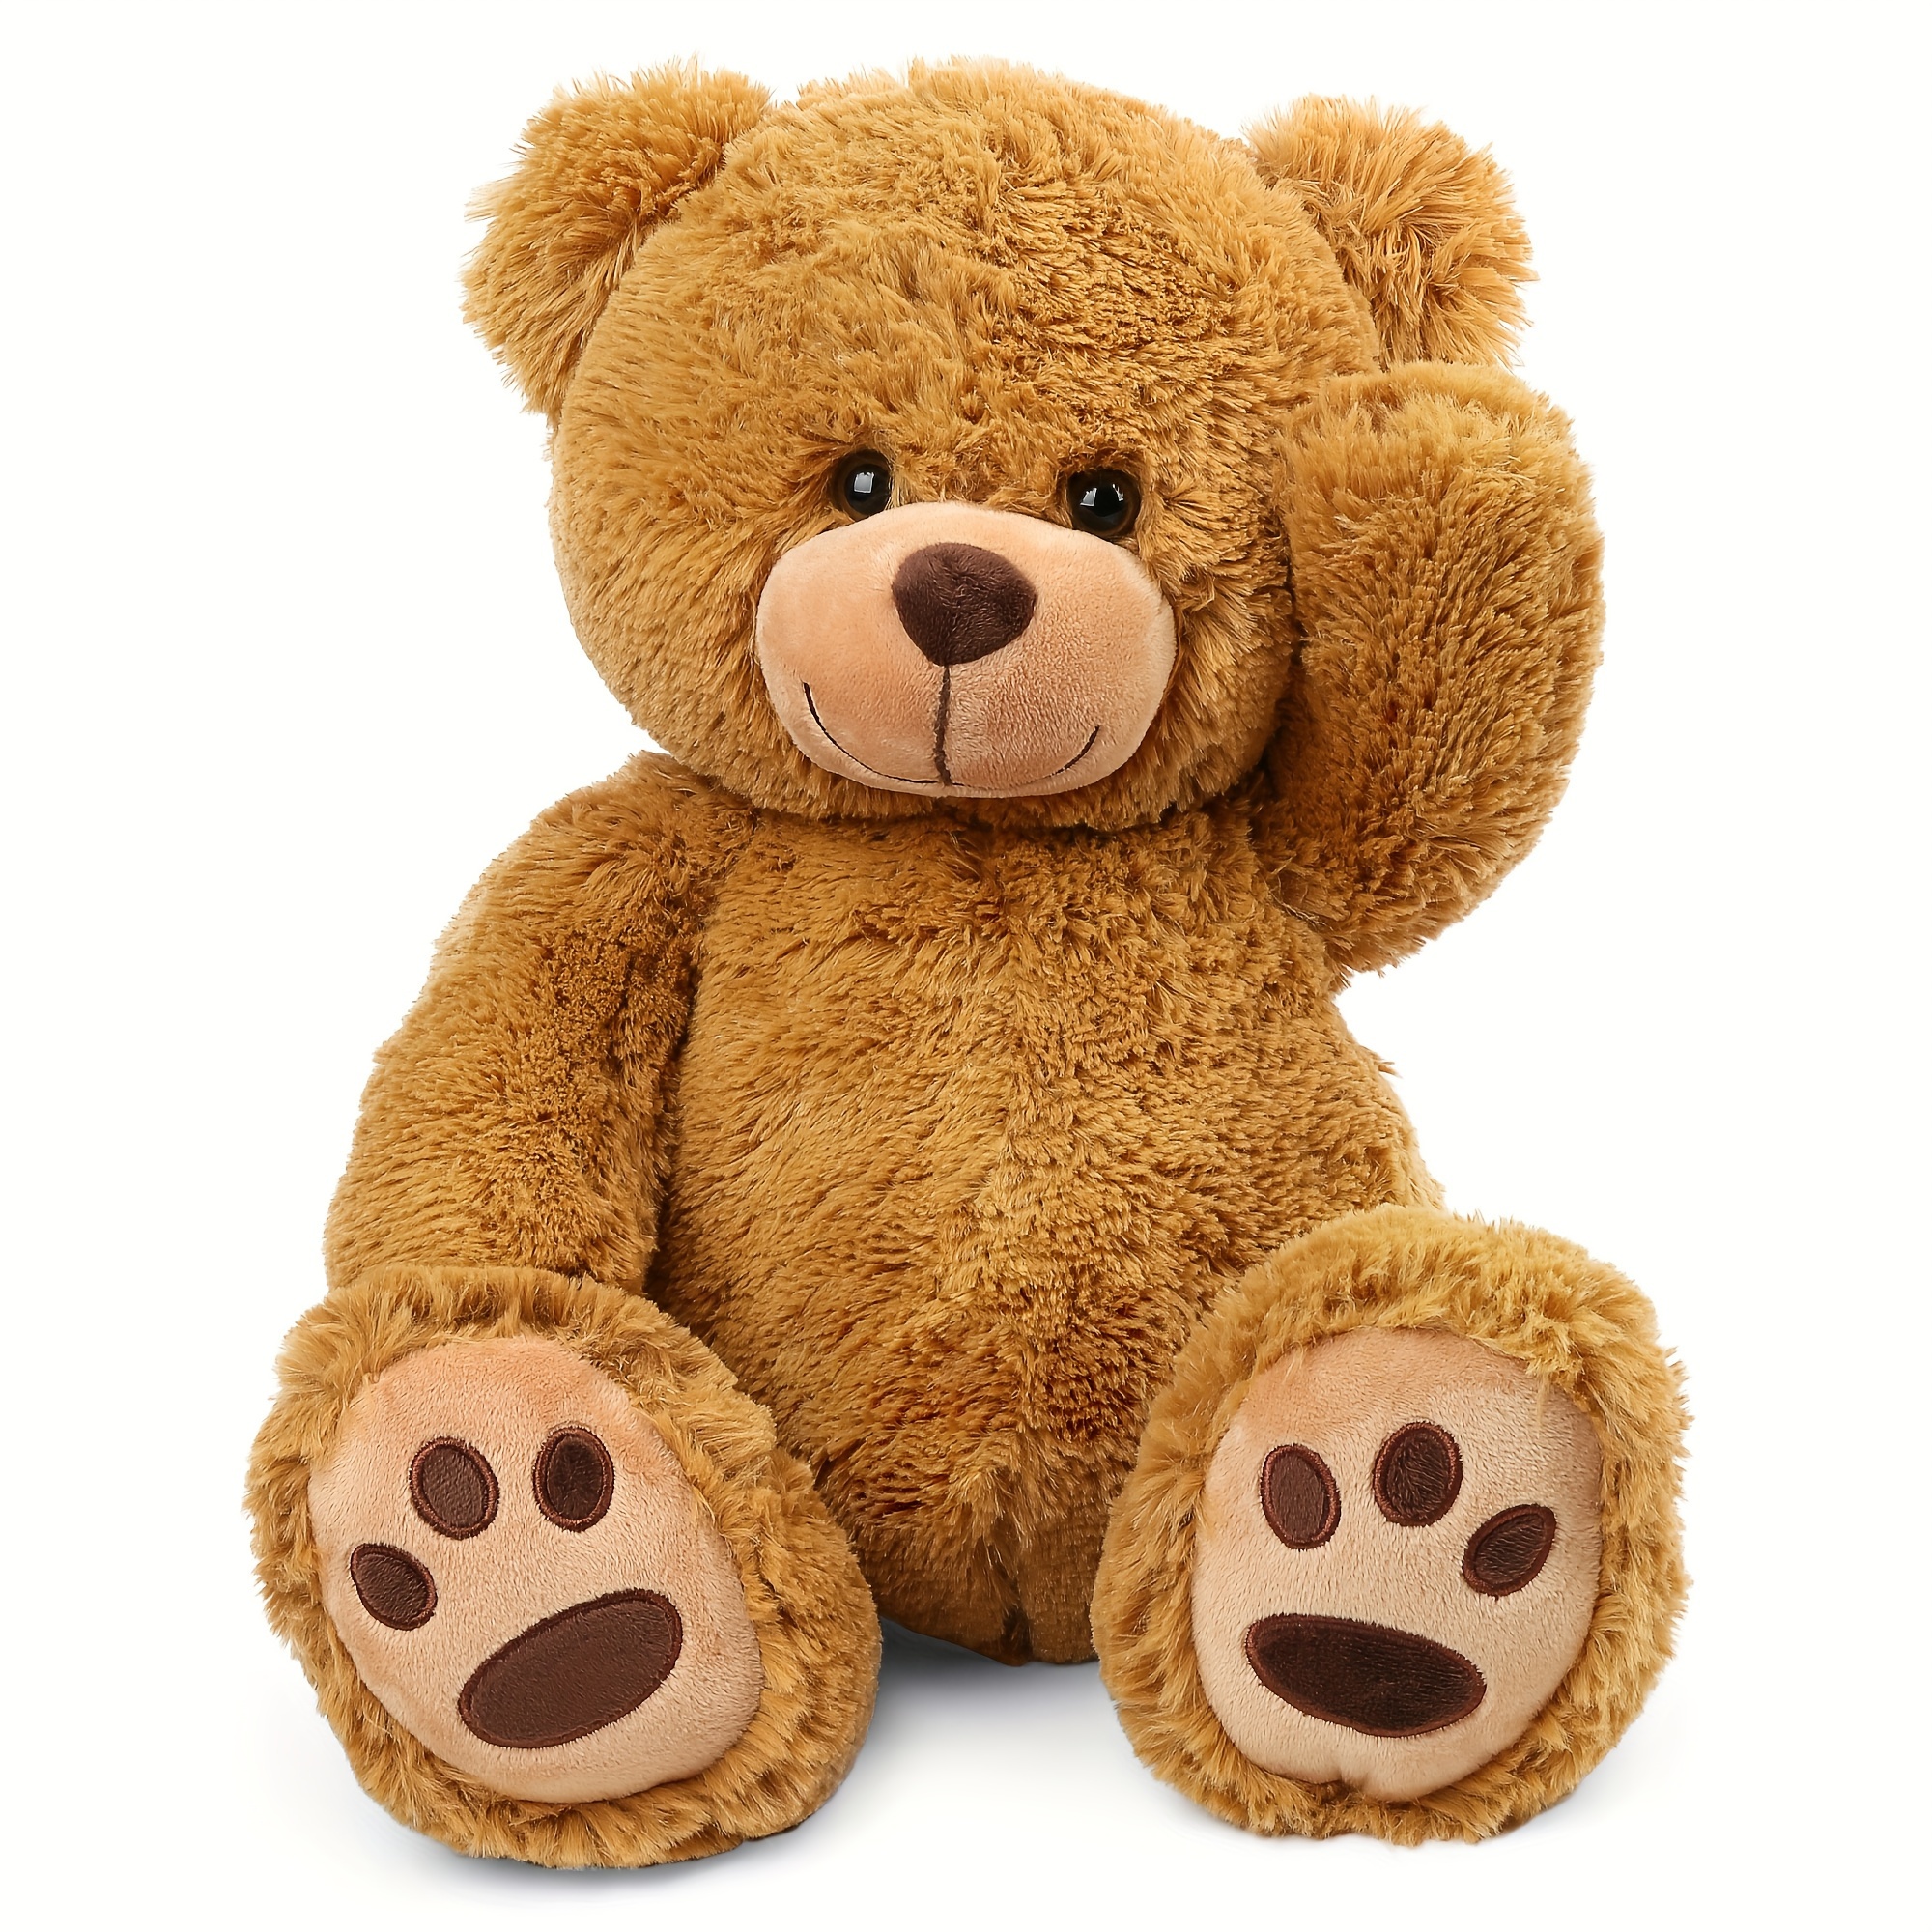 

Lot Fancy Teddy Bear Stuffed Animals, 20 Inch Soft Cuddly Stuffed Plush Bear, Cute Stuffed Animals Toy With Footprints, Gifts For Kids Baby Toddlers On Baby Shower, Valentine's Day, Brown